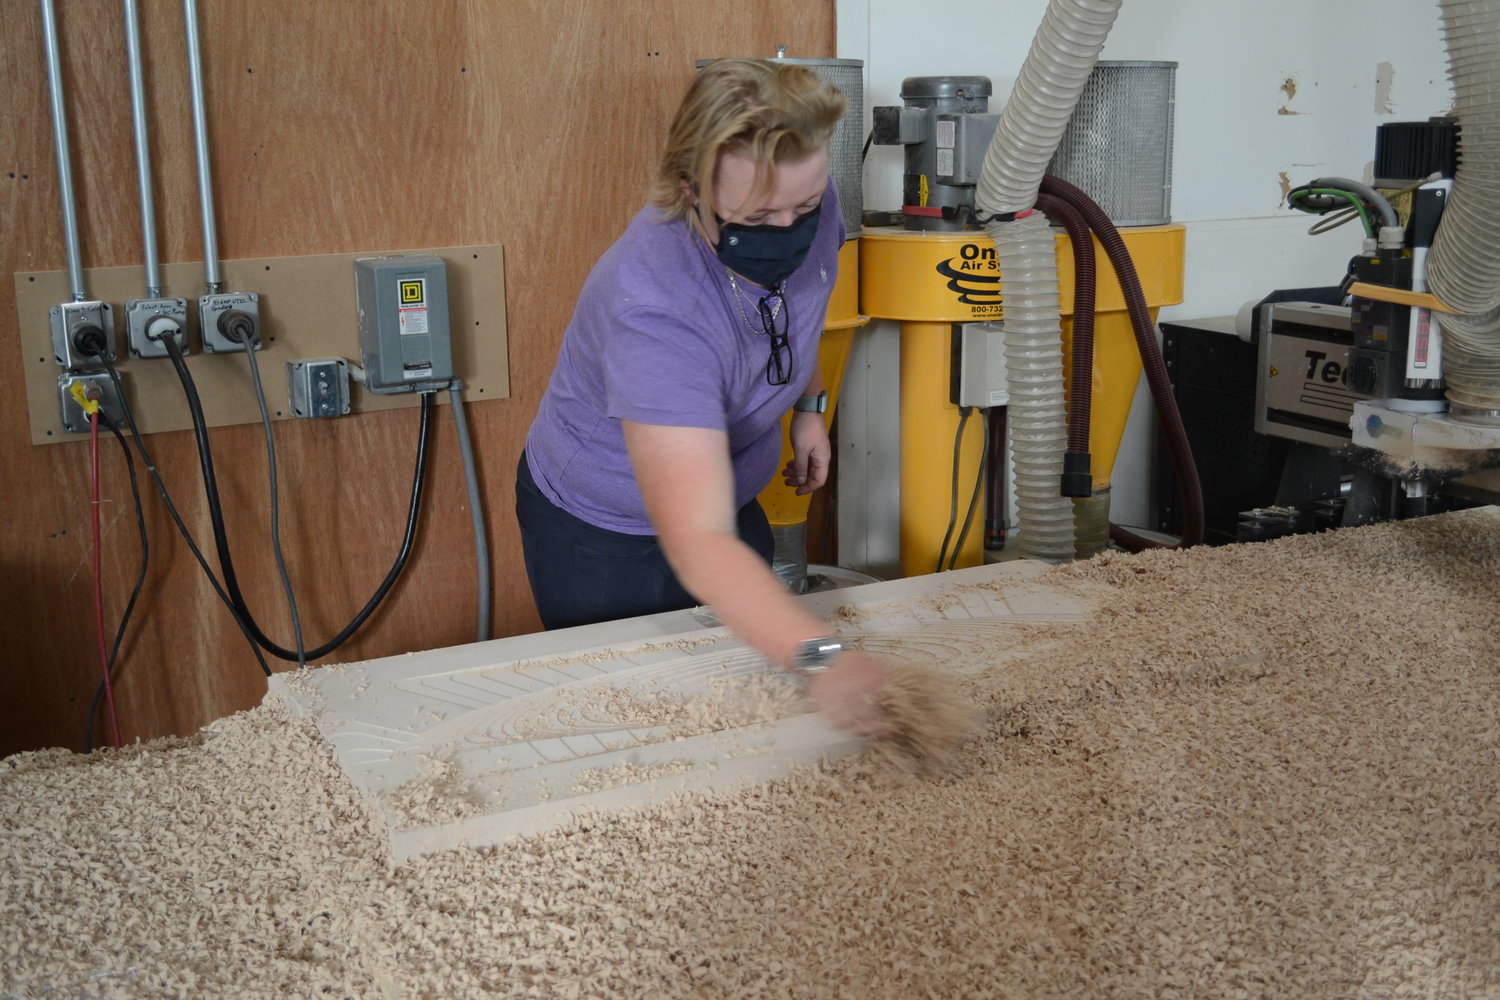 Darya Blout, founder and owner of Canapitsit Customs in Bristol, brushes shavings away from a mold as it is crafted by a CNC machine. The mold was ordered by a local kiteboarding manufacturer.